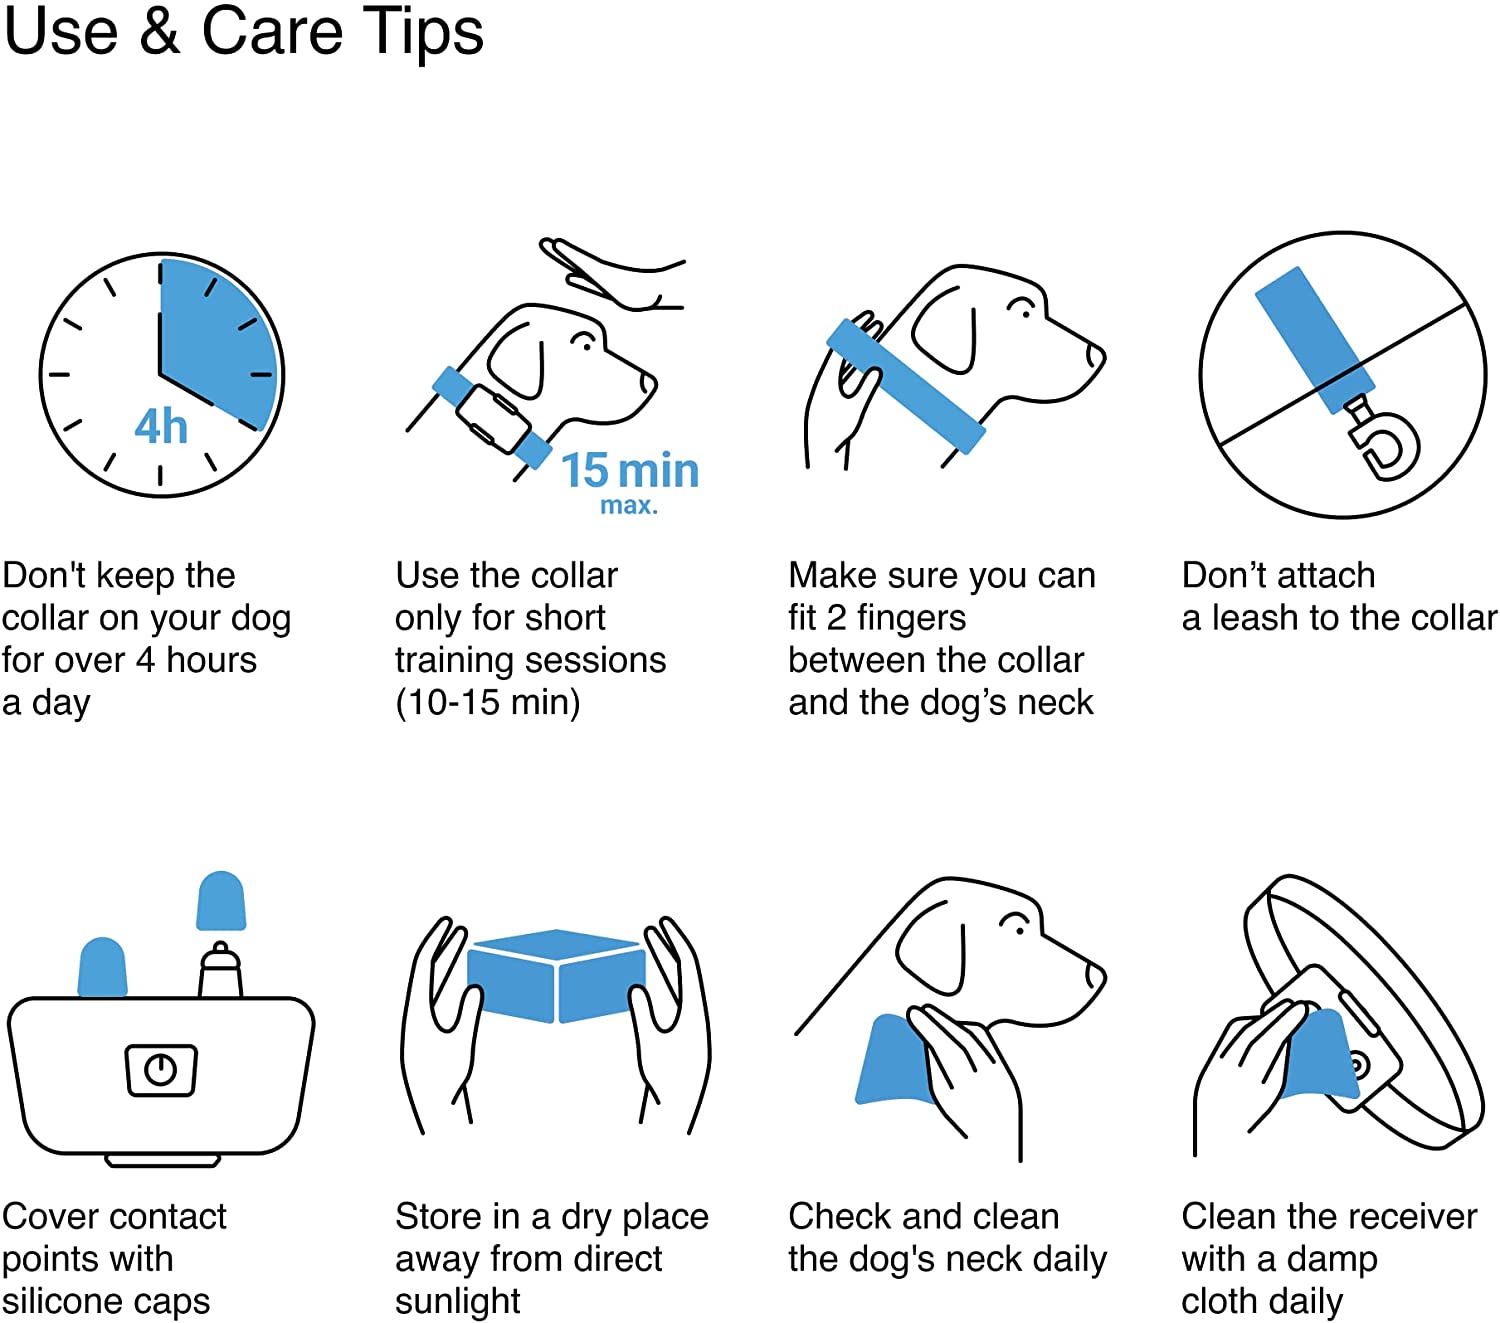 use and care tips